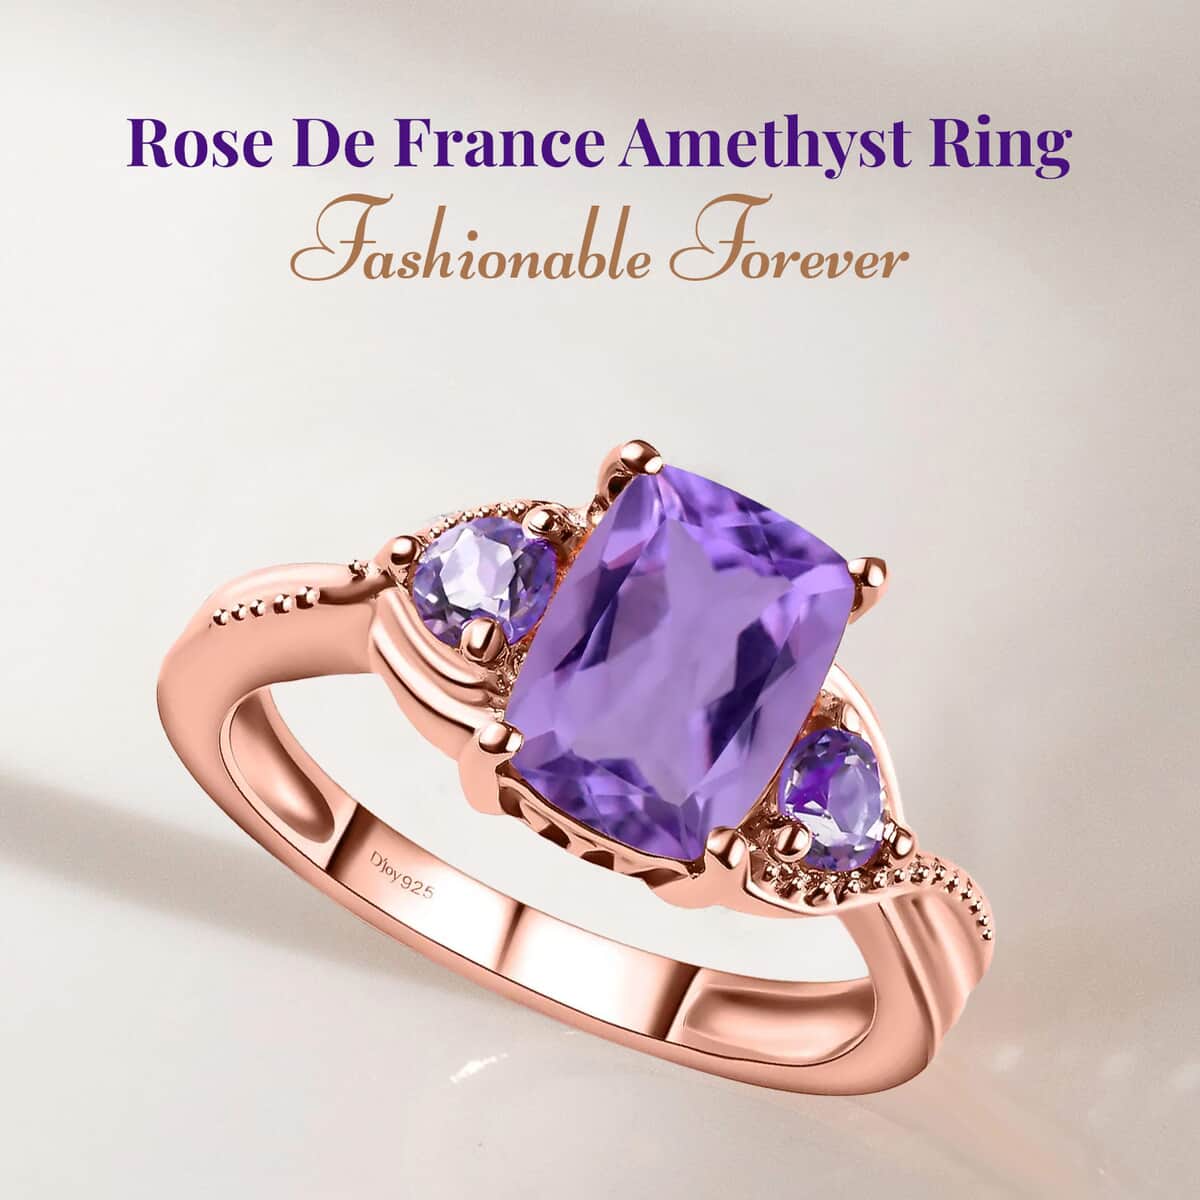 Rose De France Amethyst Ring in Rose Gold Plated Sterling Silver, Three Stone Ring, Trilogy Ring For Women, Amethyst Jewelry, Gifts For Her 1.60 ctw (Size 6.0) image number 2